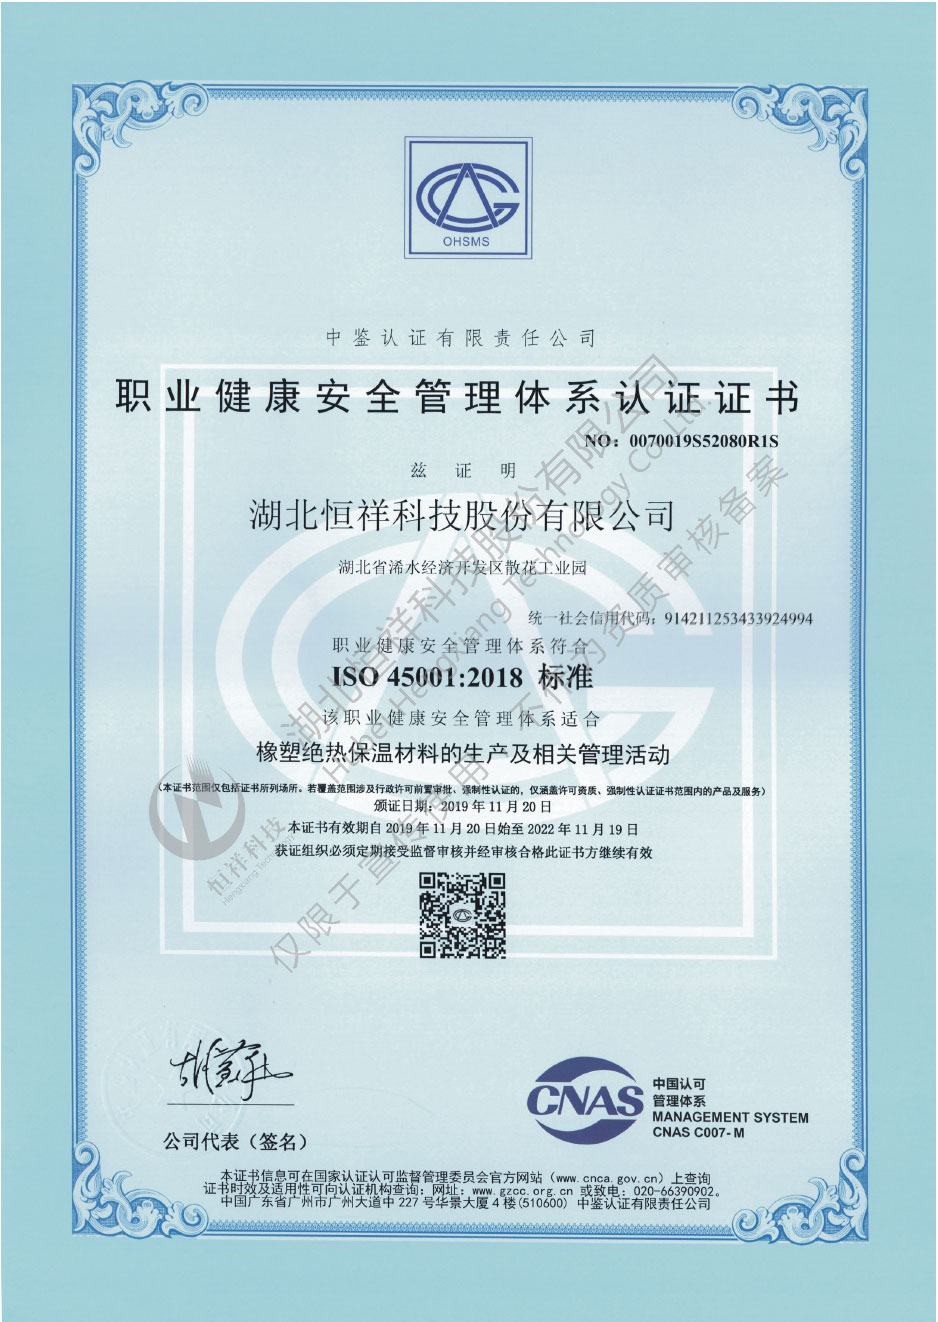 ISO 45001 Occupational Health and Safety Management System Certificate